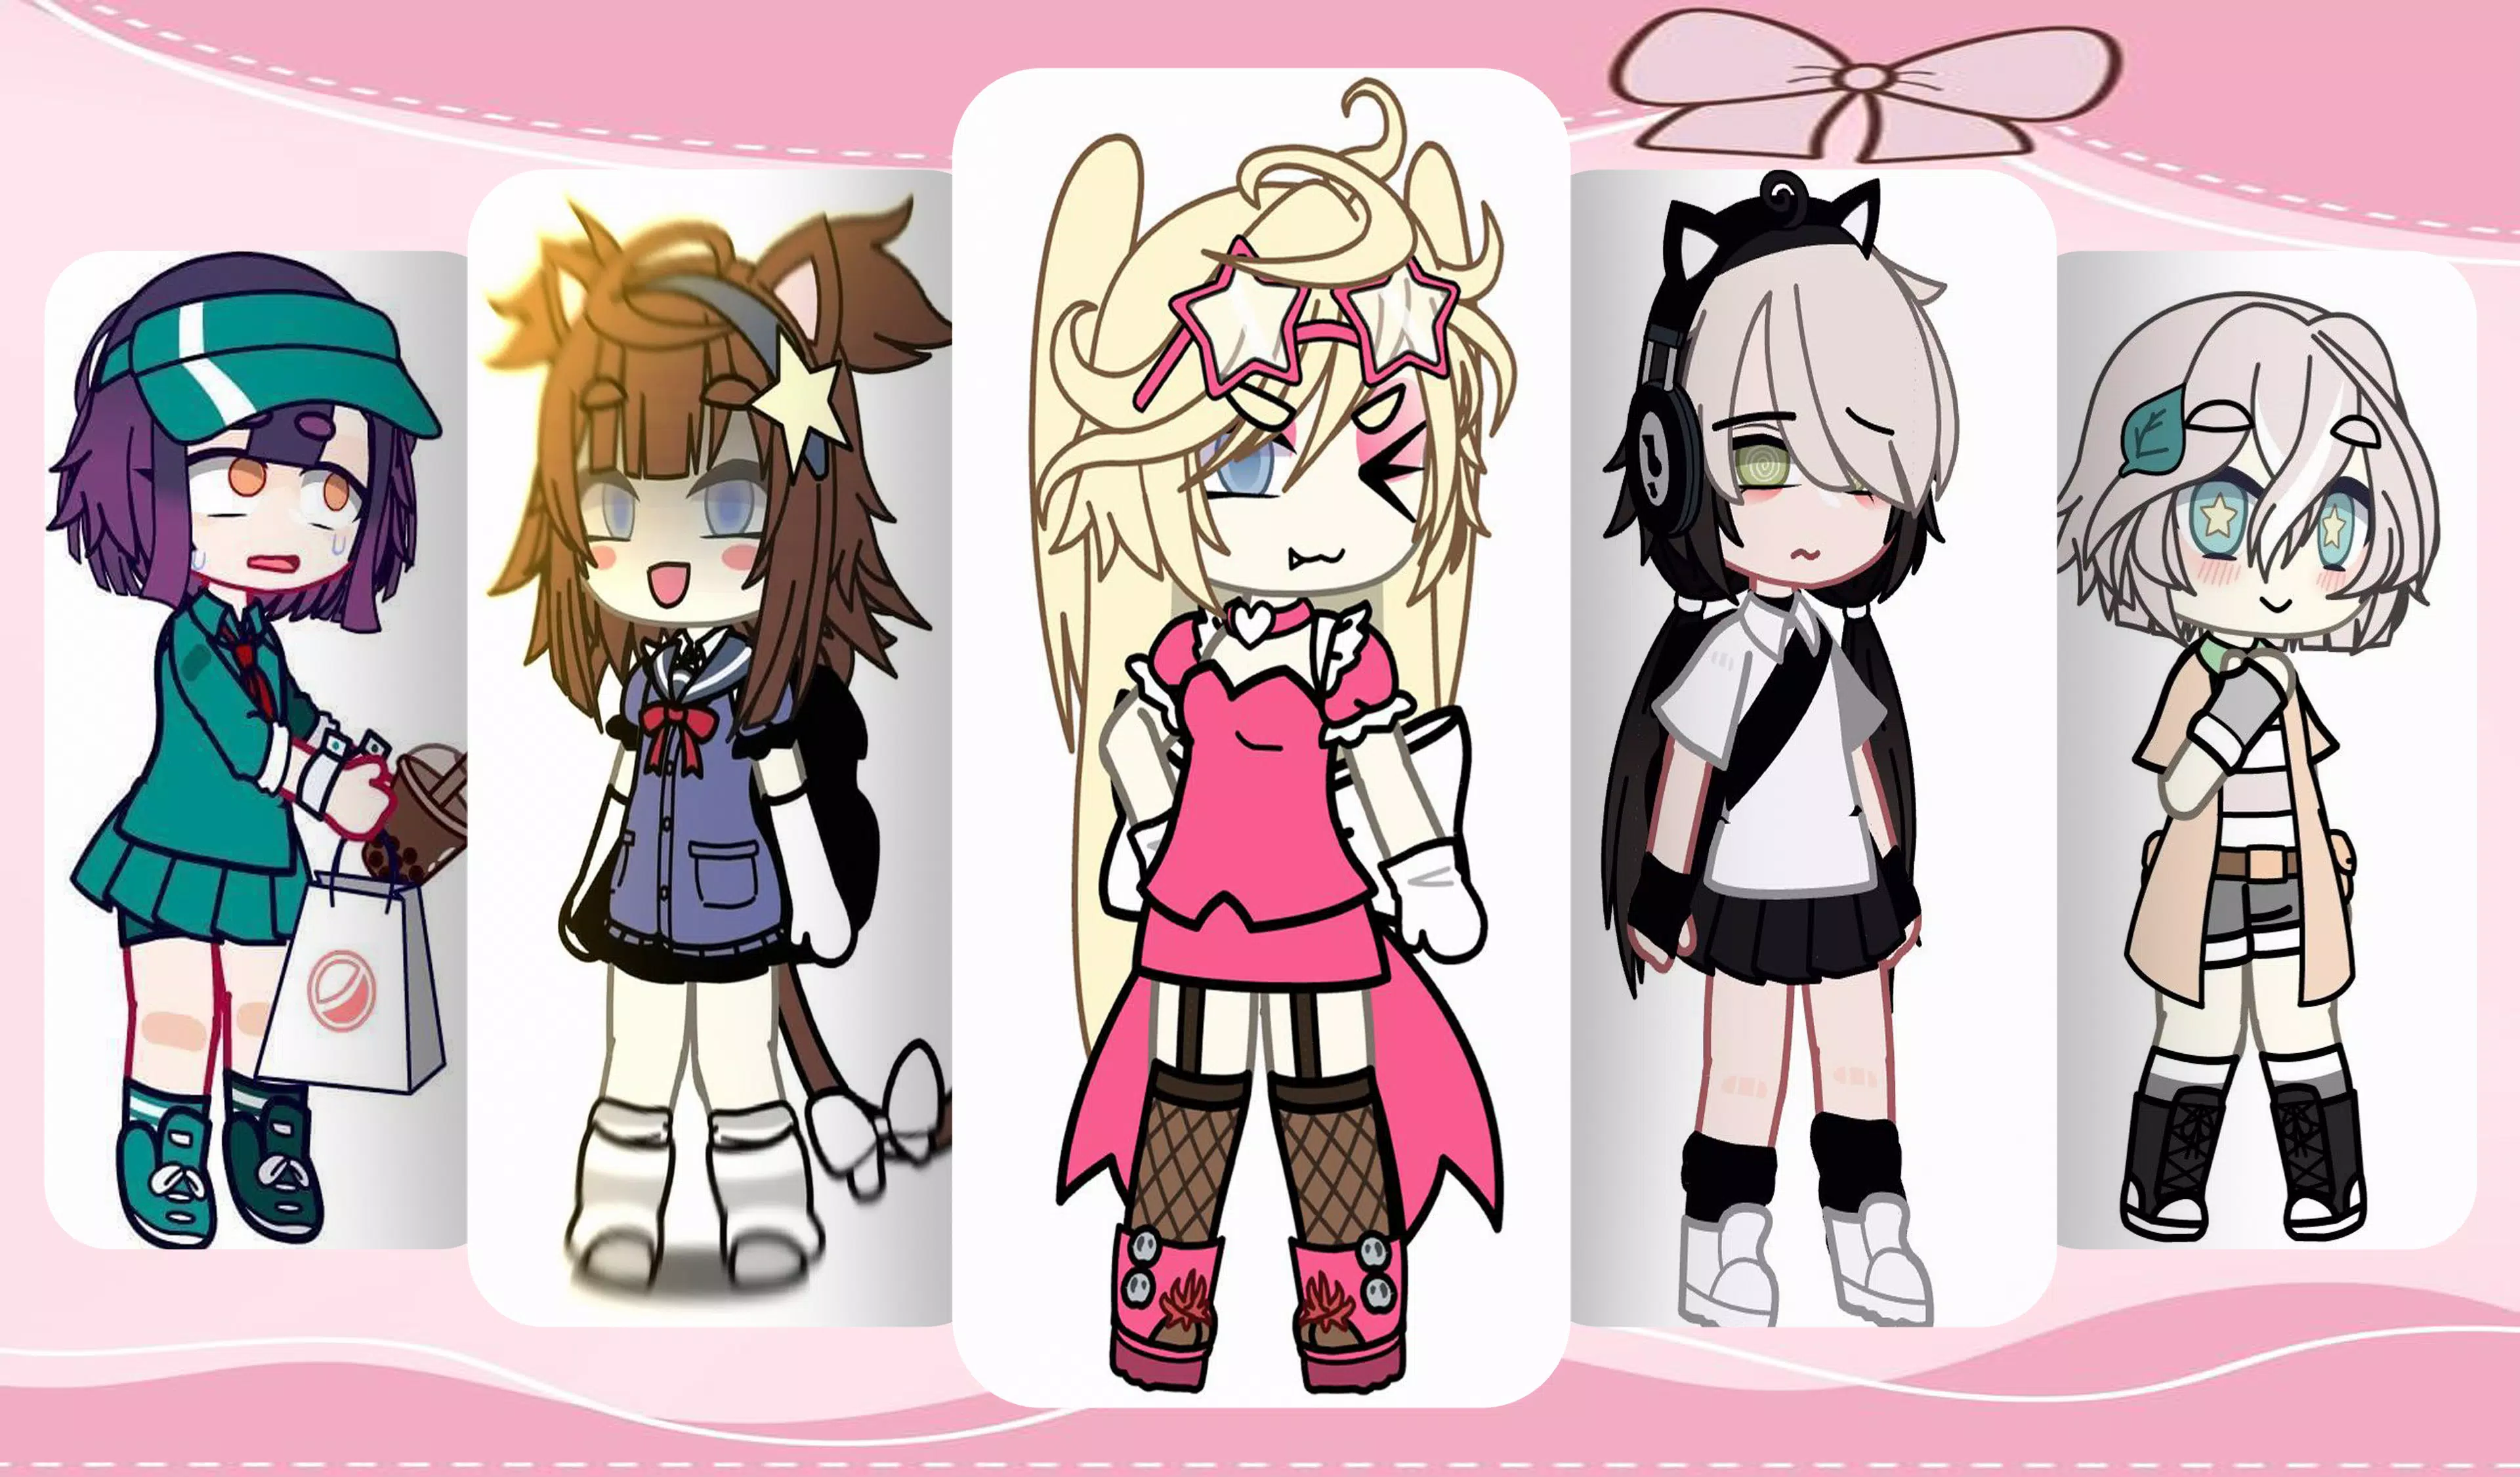 Gacha club clothes <3  Club outfits, Club outfit ideas, Character